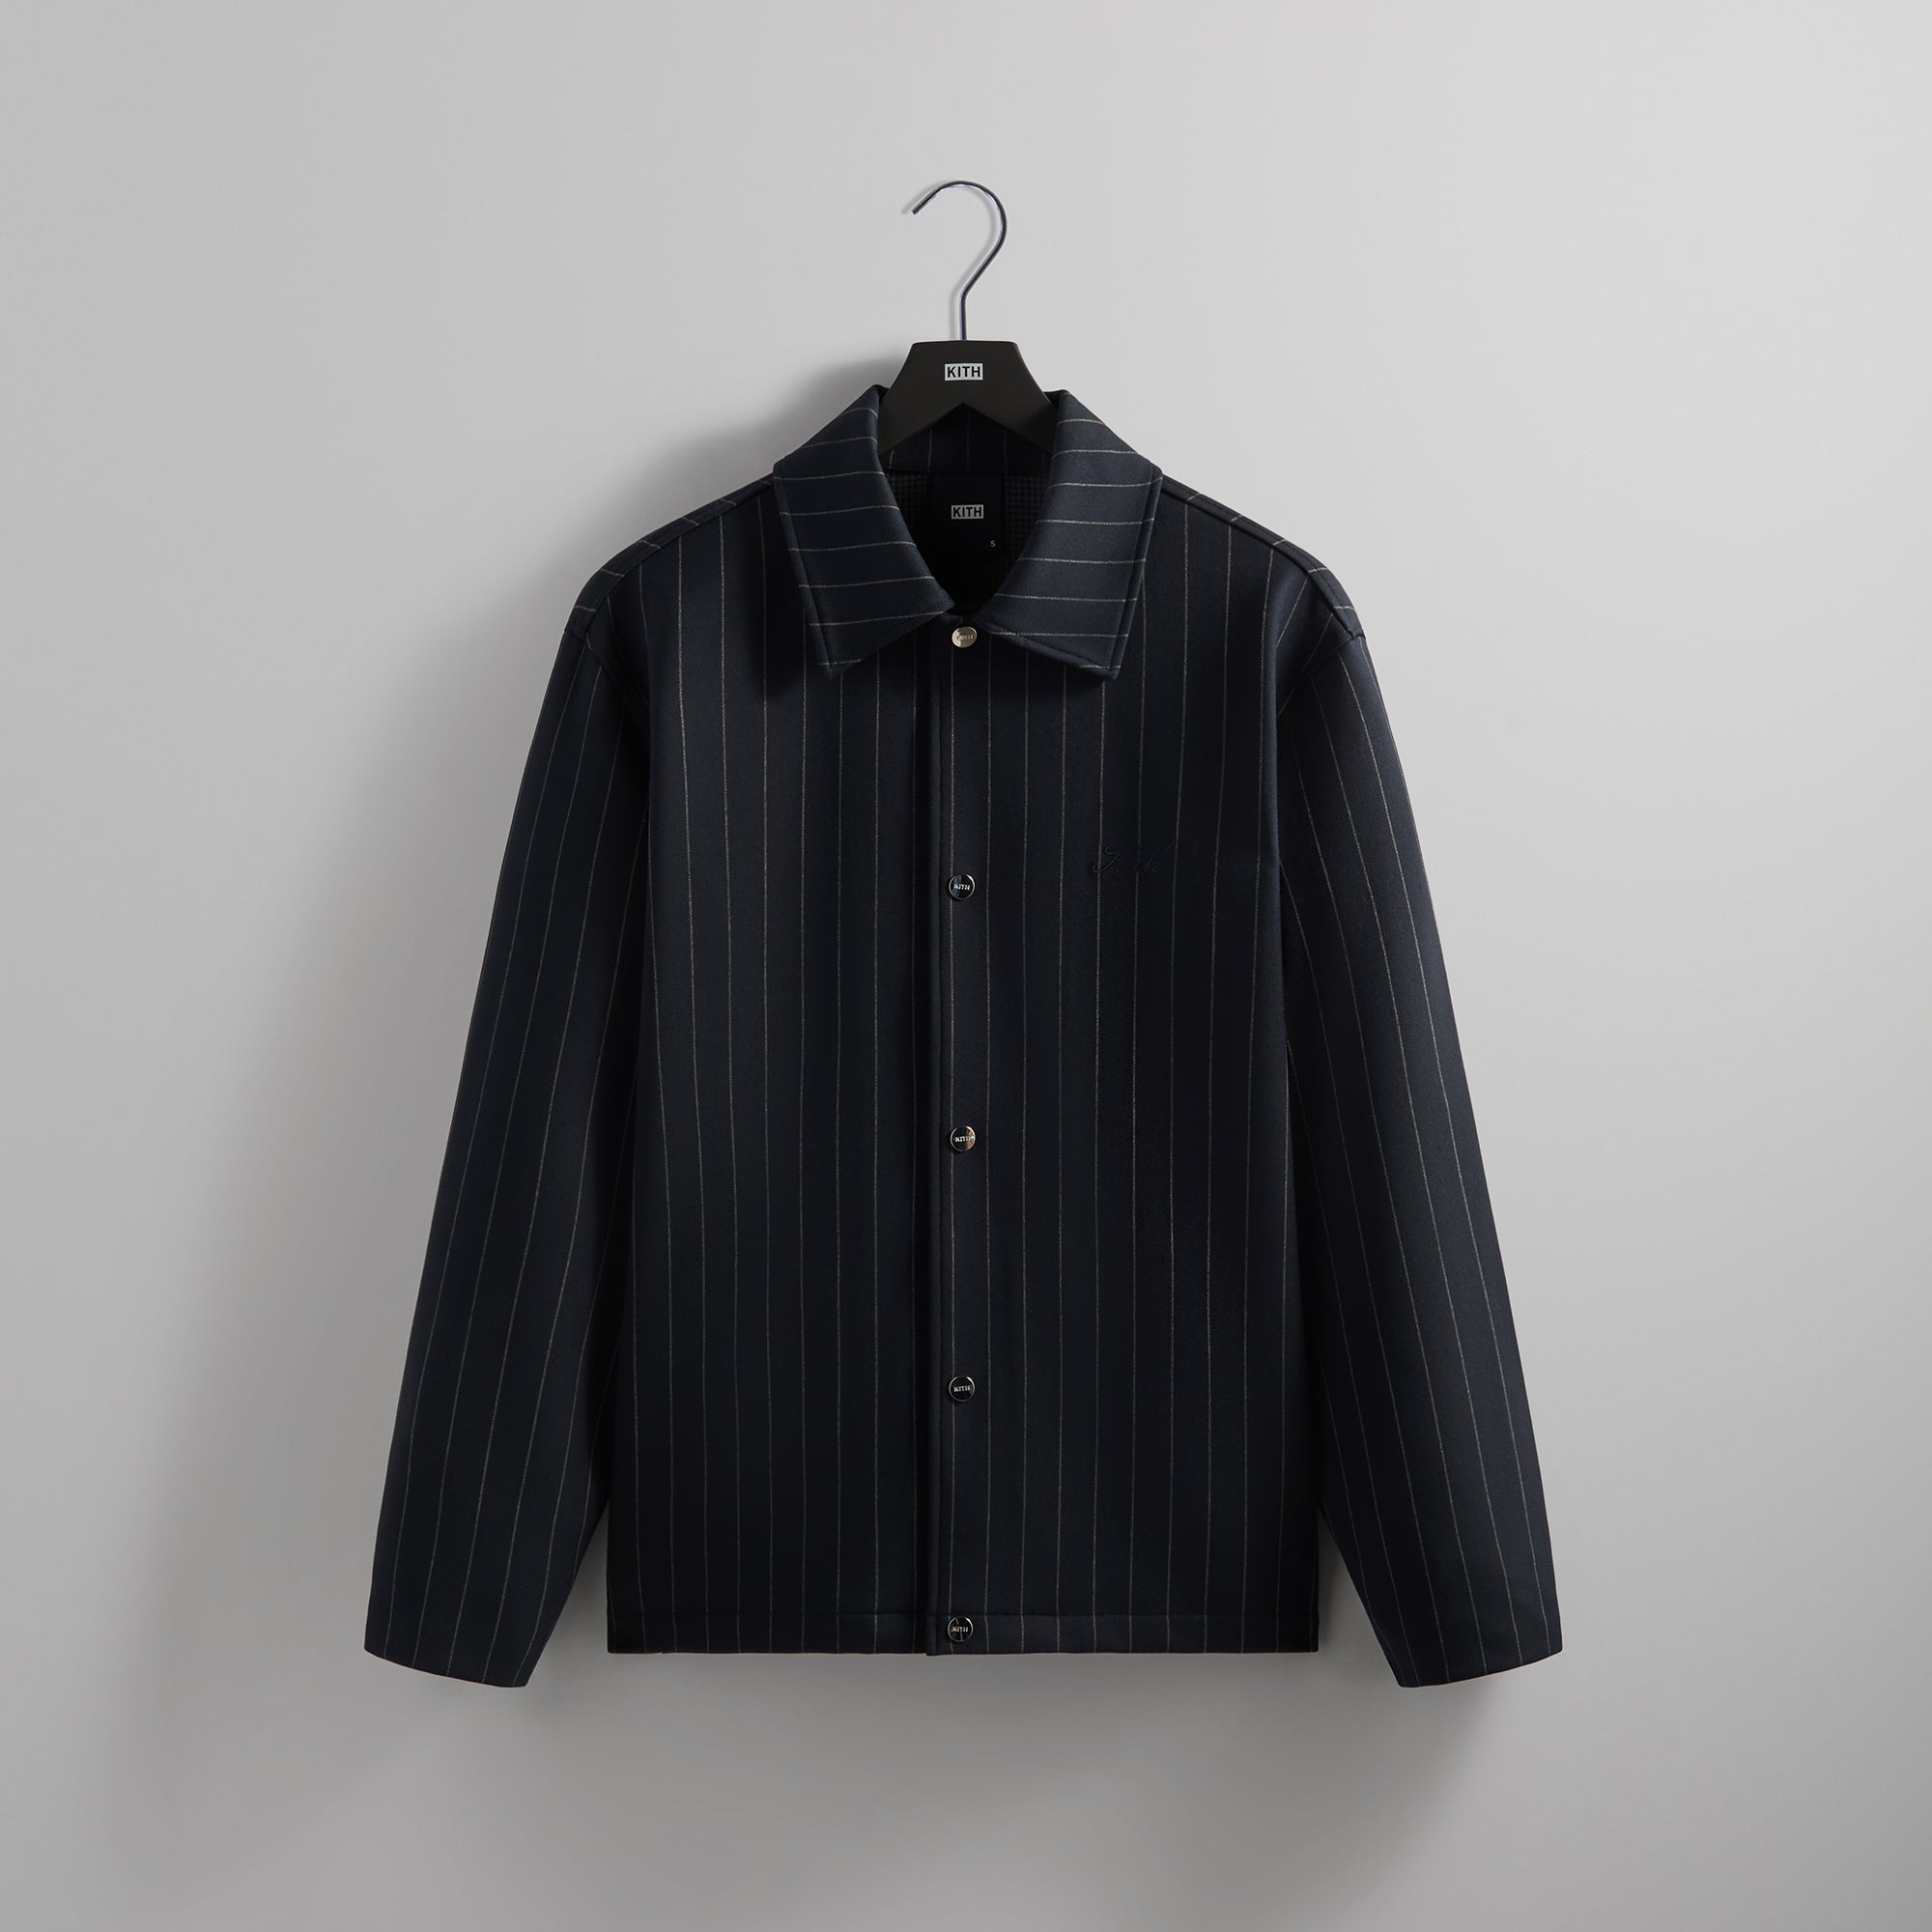 Kith Pinstripe Double Knit Coaches Jacket - Nocturnal